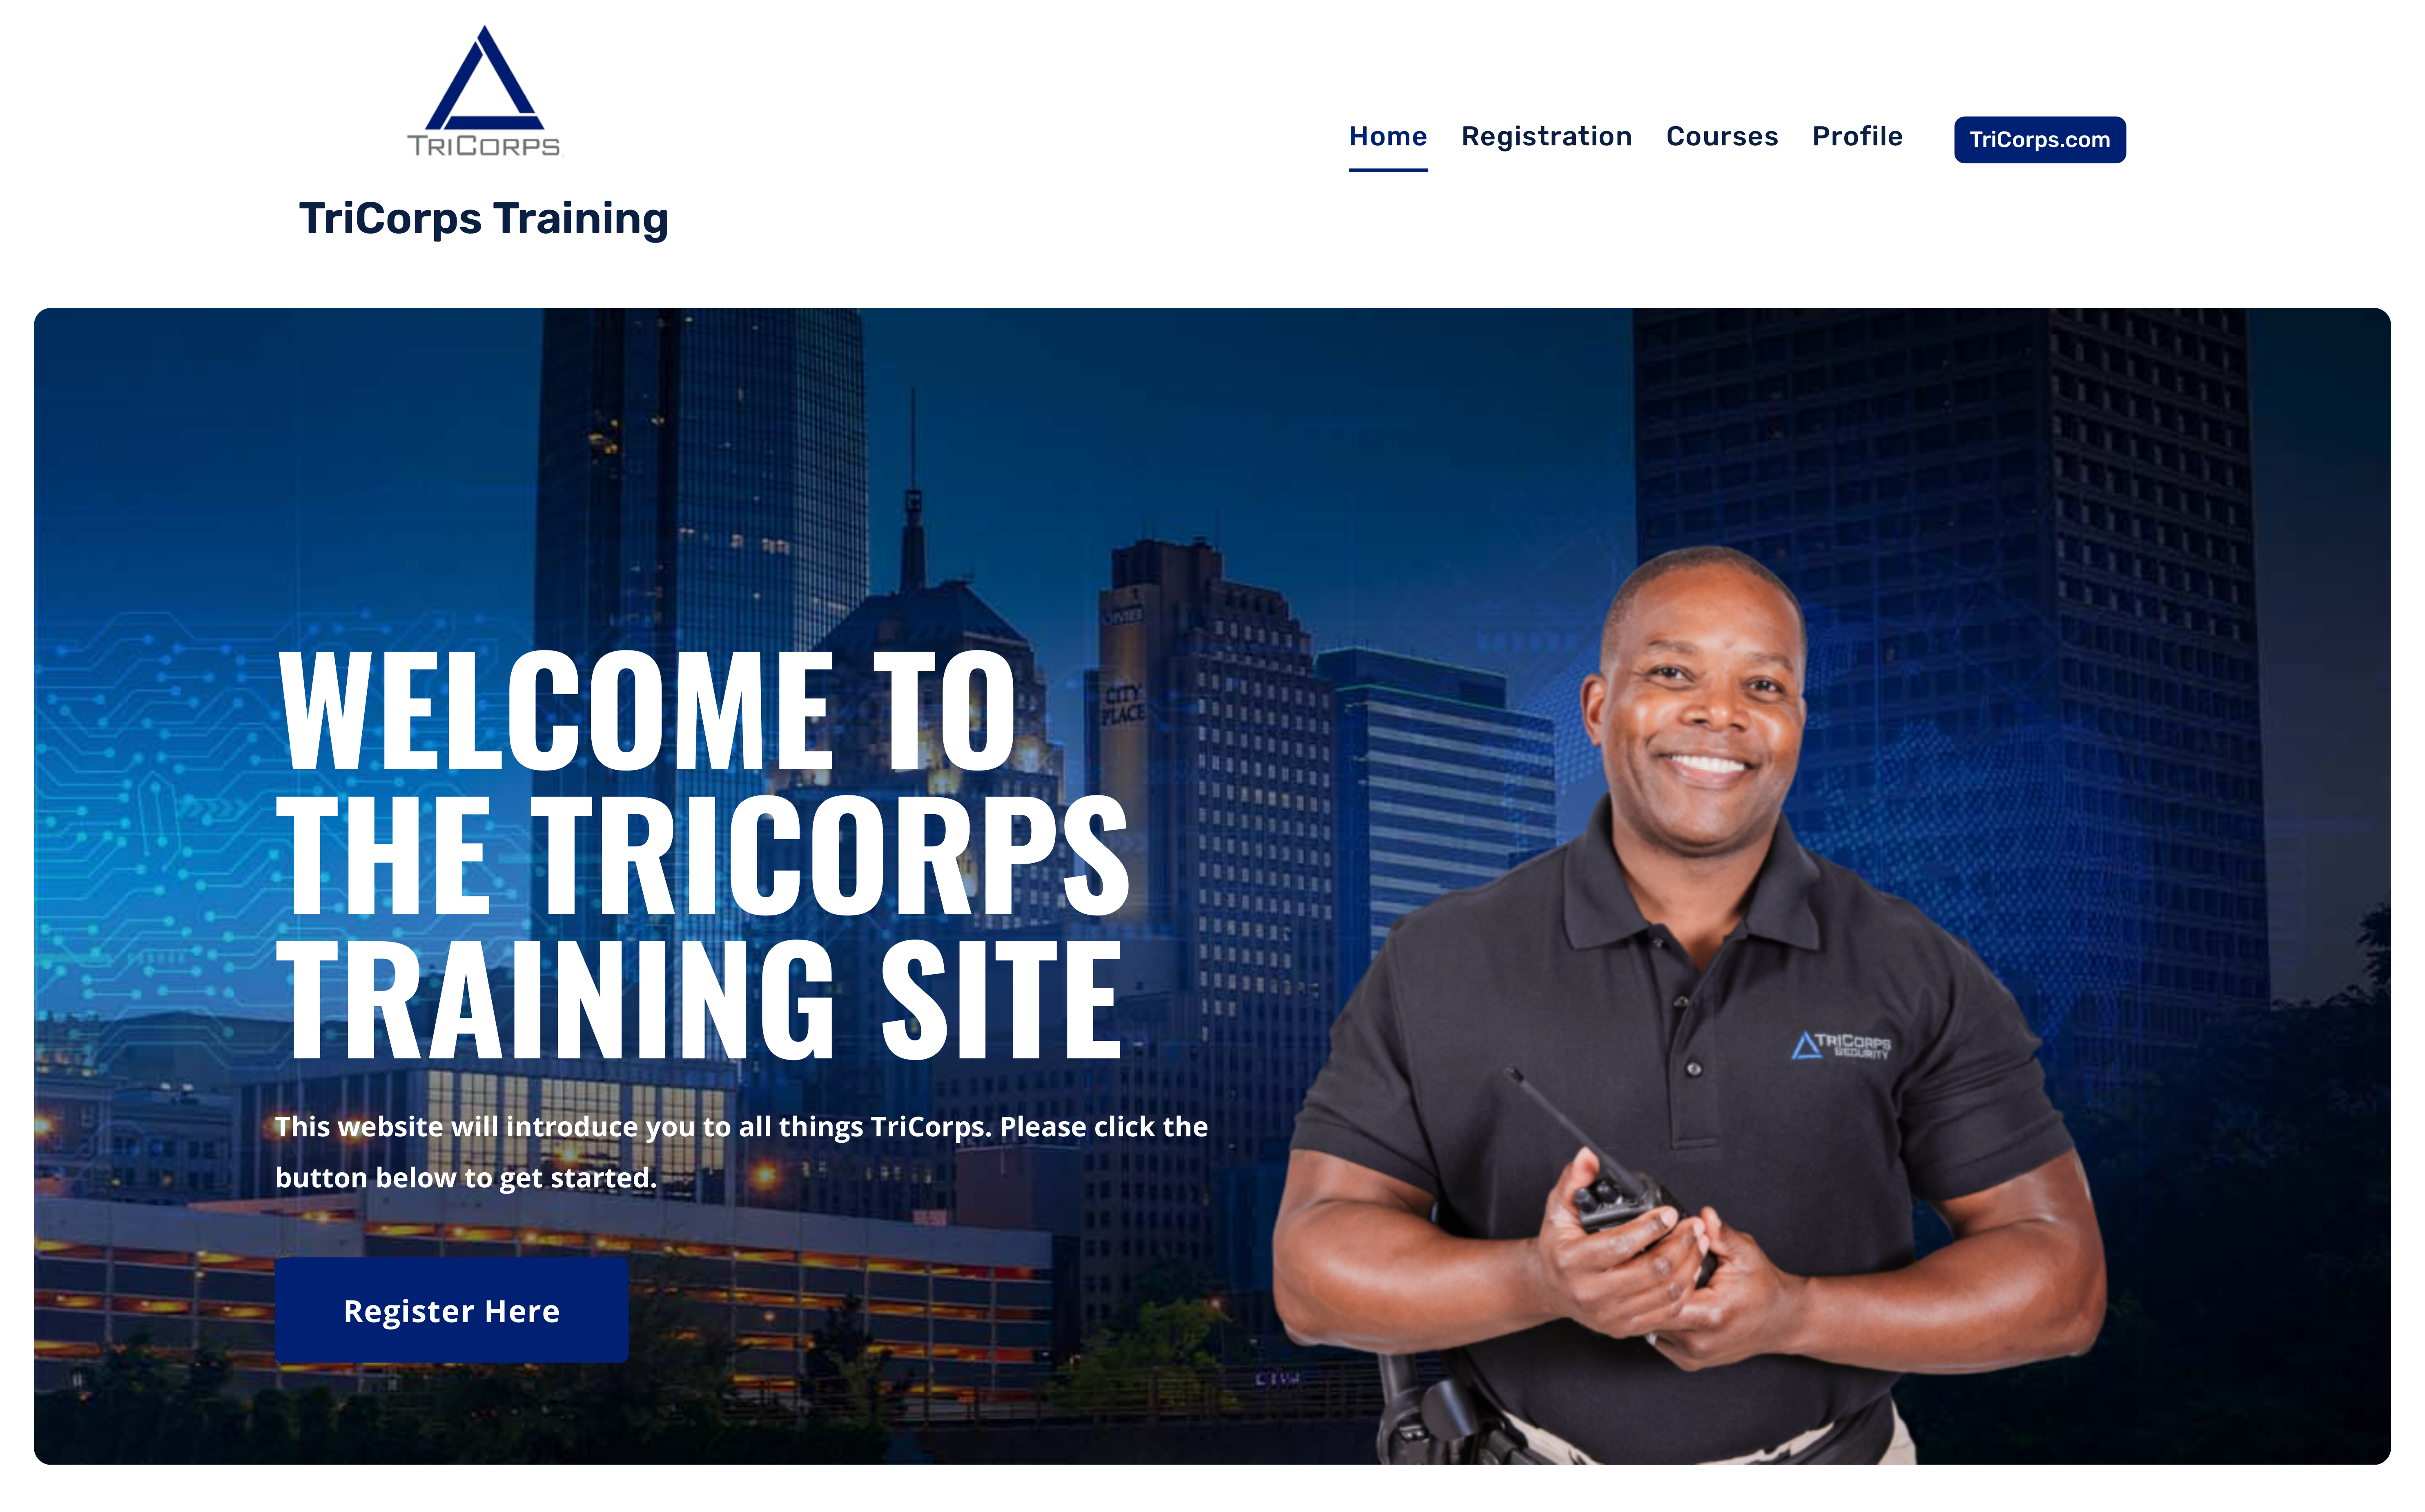 Introducing the TriCorps Training Site